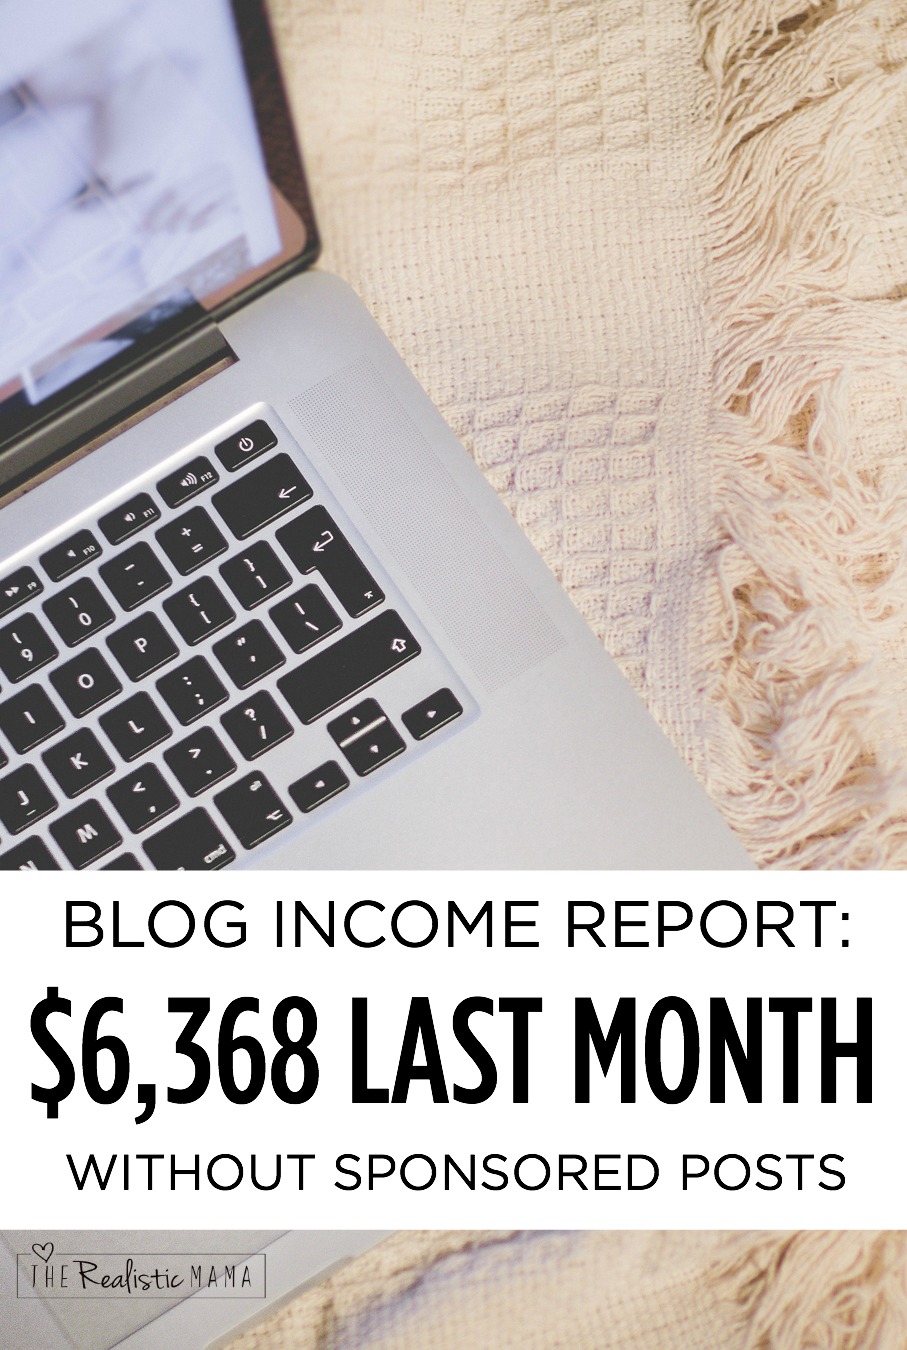 Blog Income Report: How I made $6368 Last Month without Sponsored Posts + Tips on How to Start a Blog